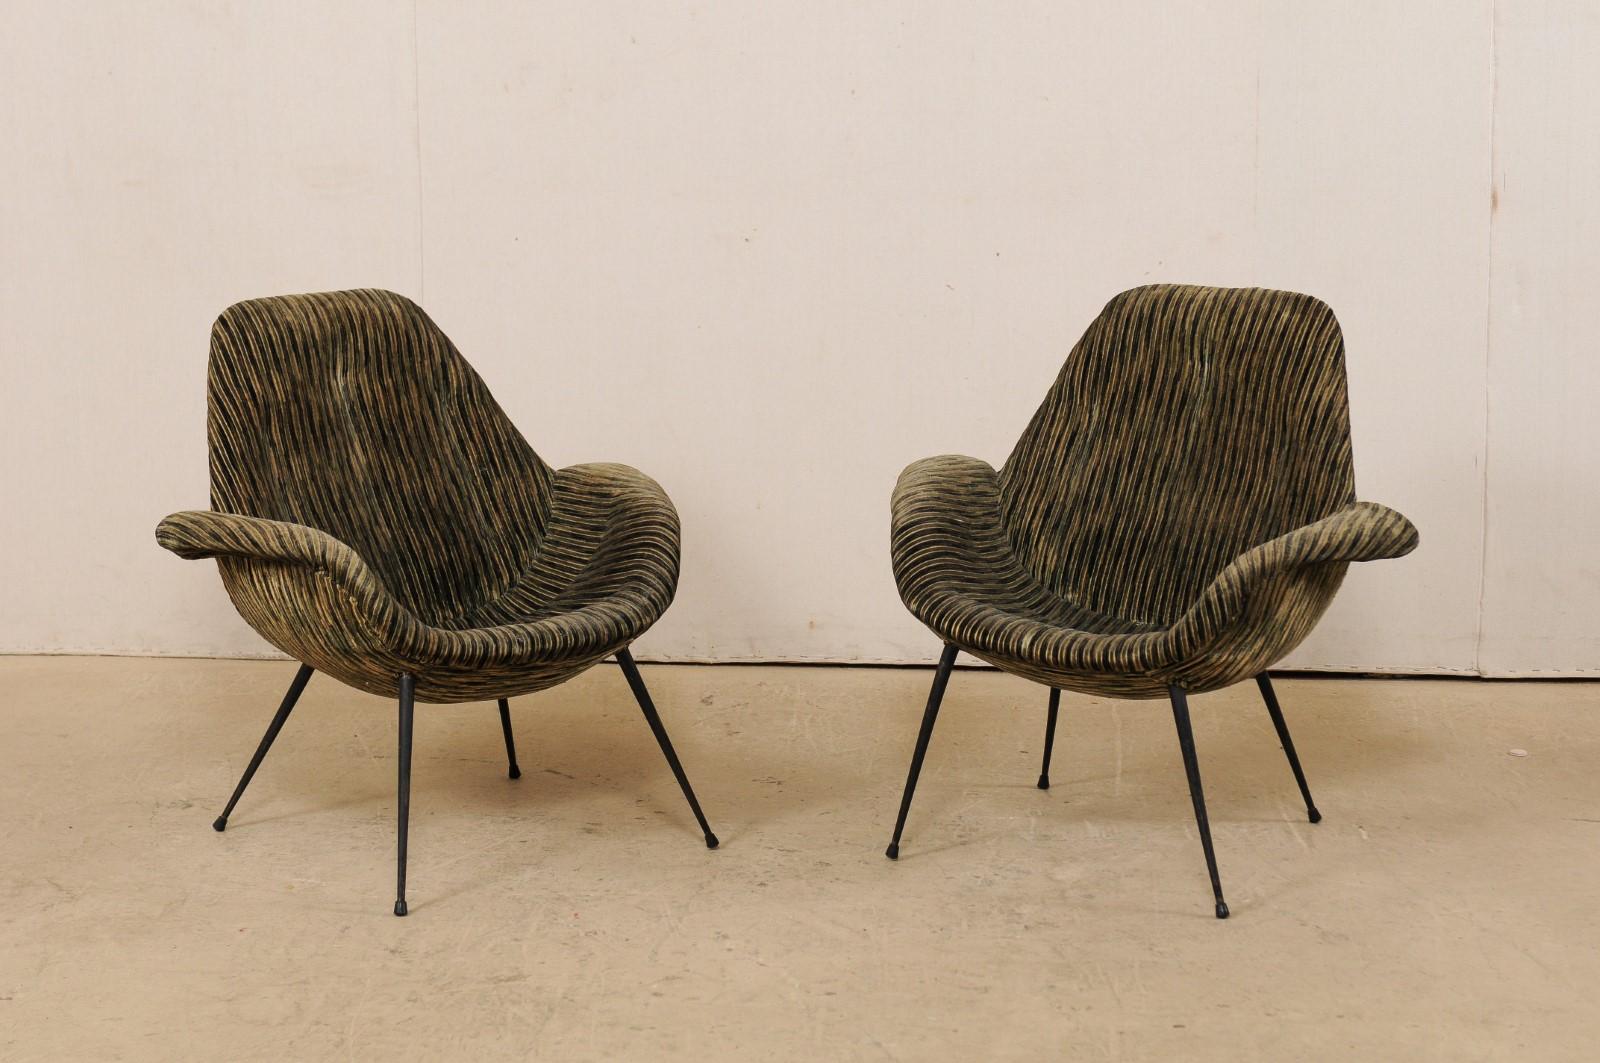 An Italian pair of modern design club chairs from the mid-20th century. This midcentury pair of armchairs from Italy are stylishly designed with scooped seats, nicely curved backs, and graceful arms which are a smooth transition between sides and